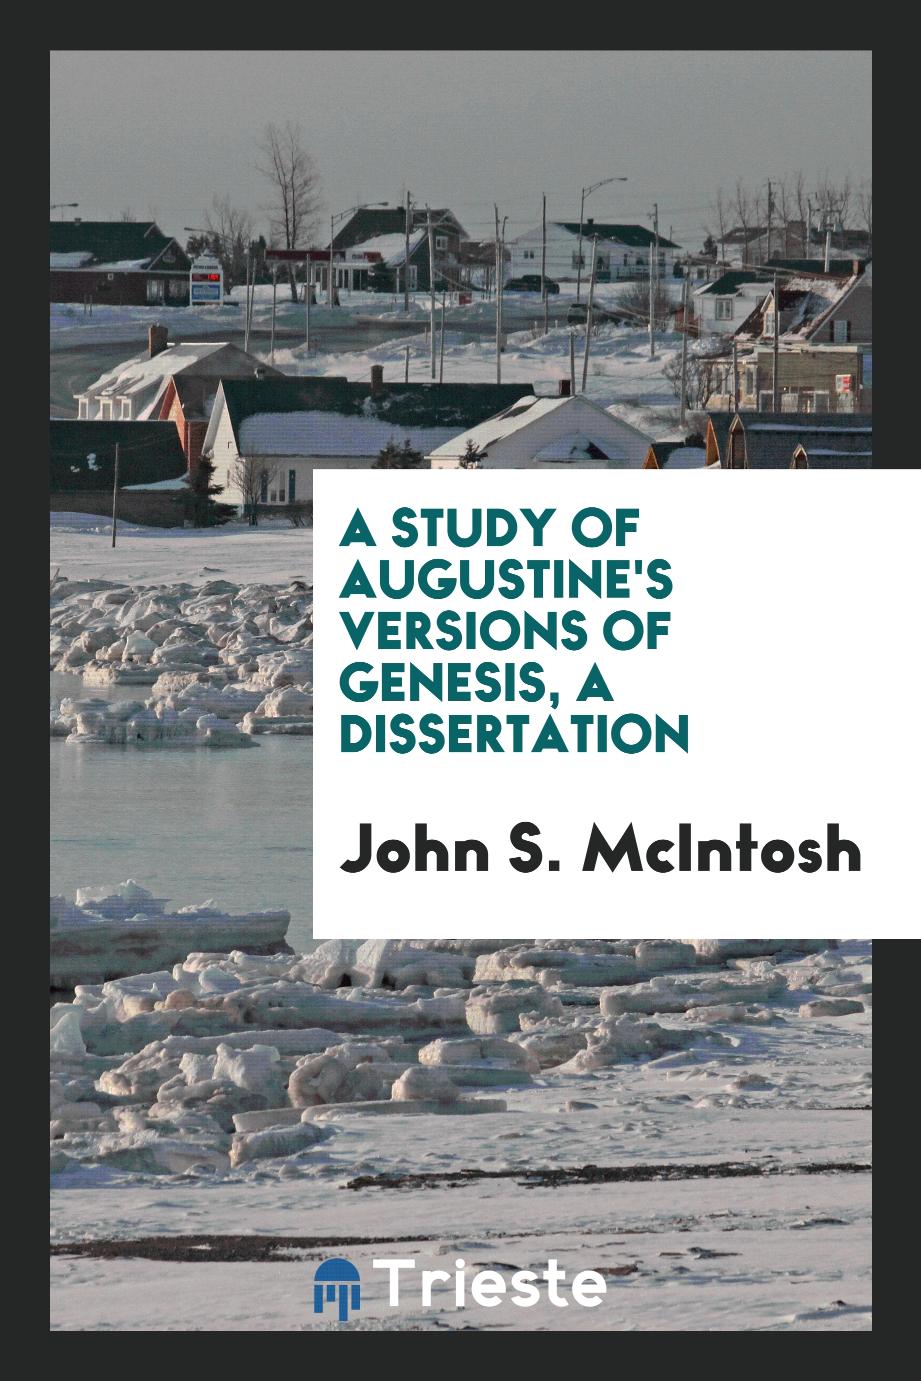 A Study of Augustine's Versions of Genesis, a Dissertation